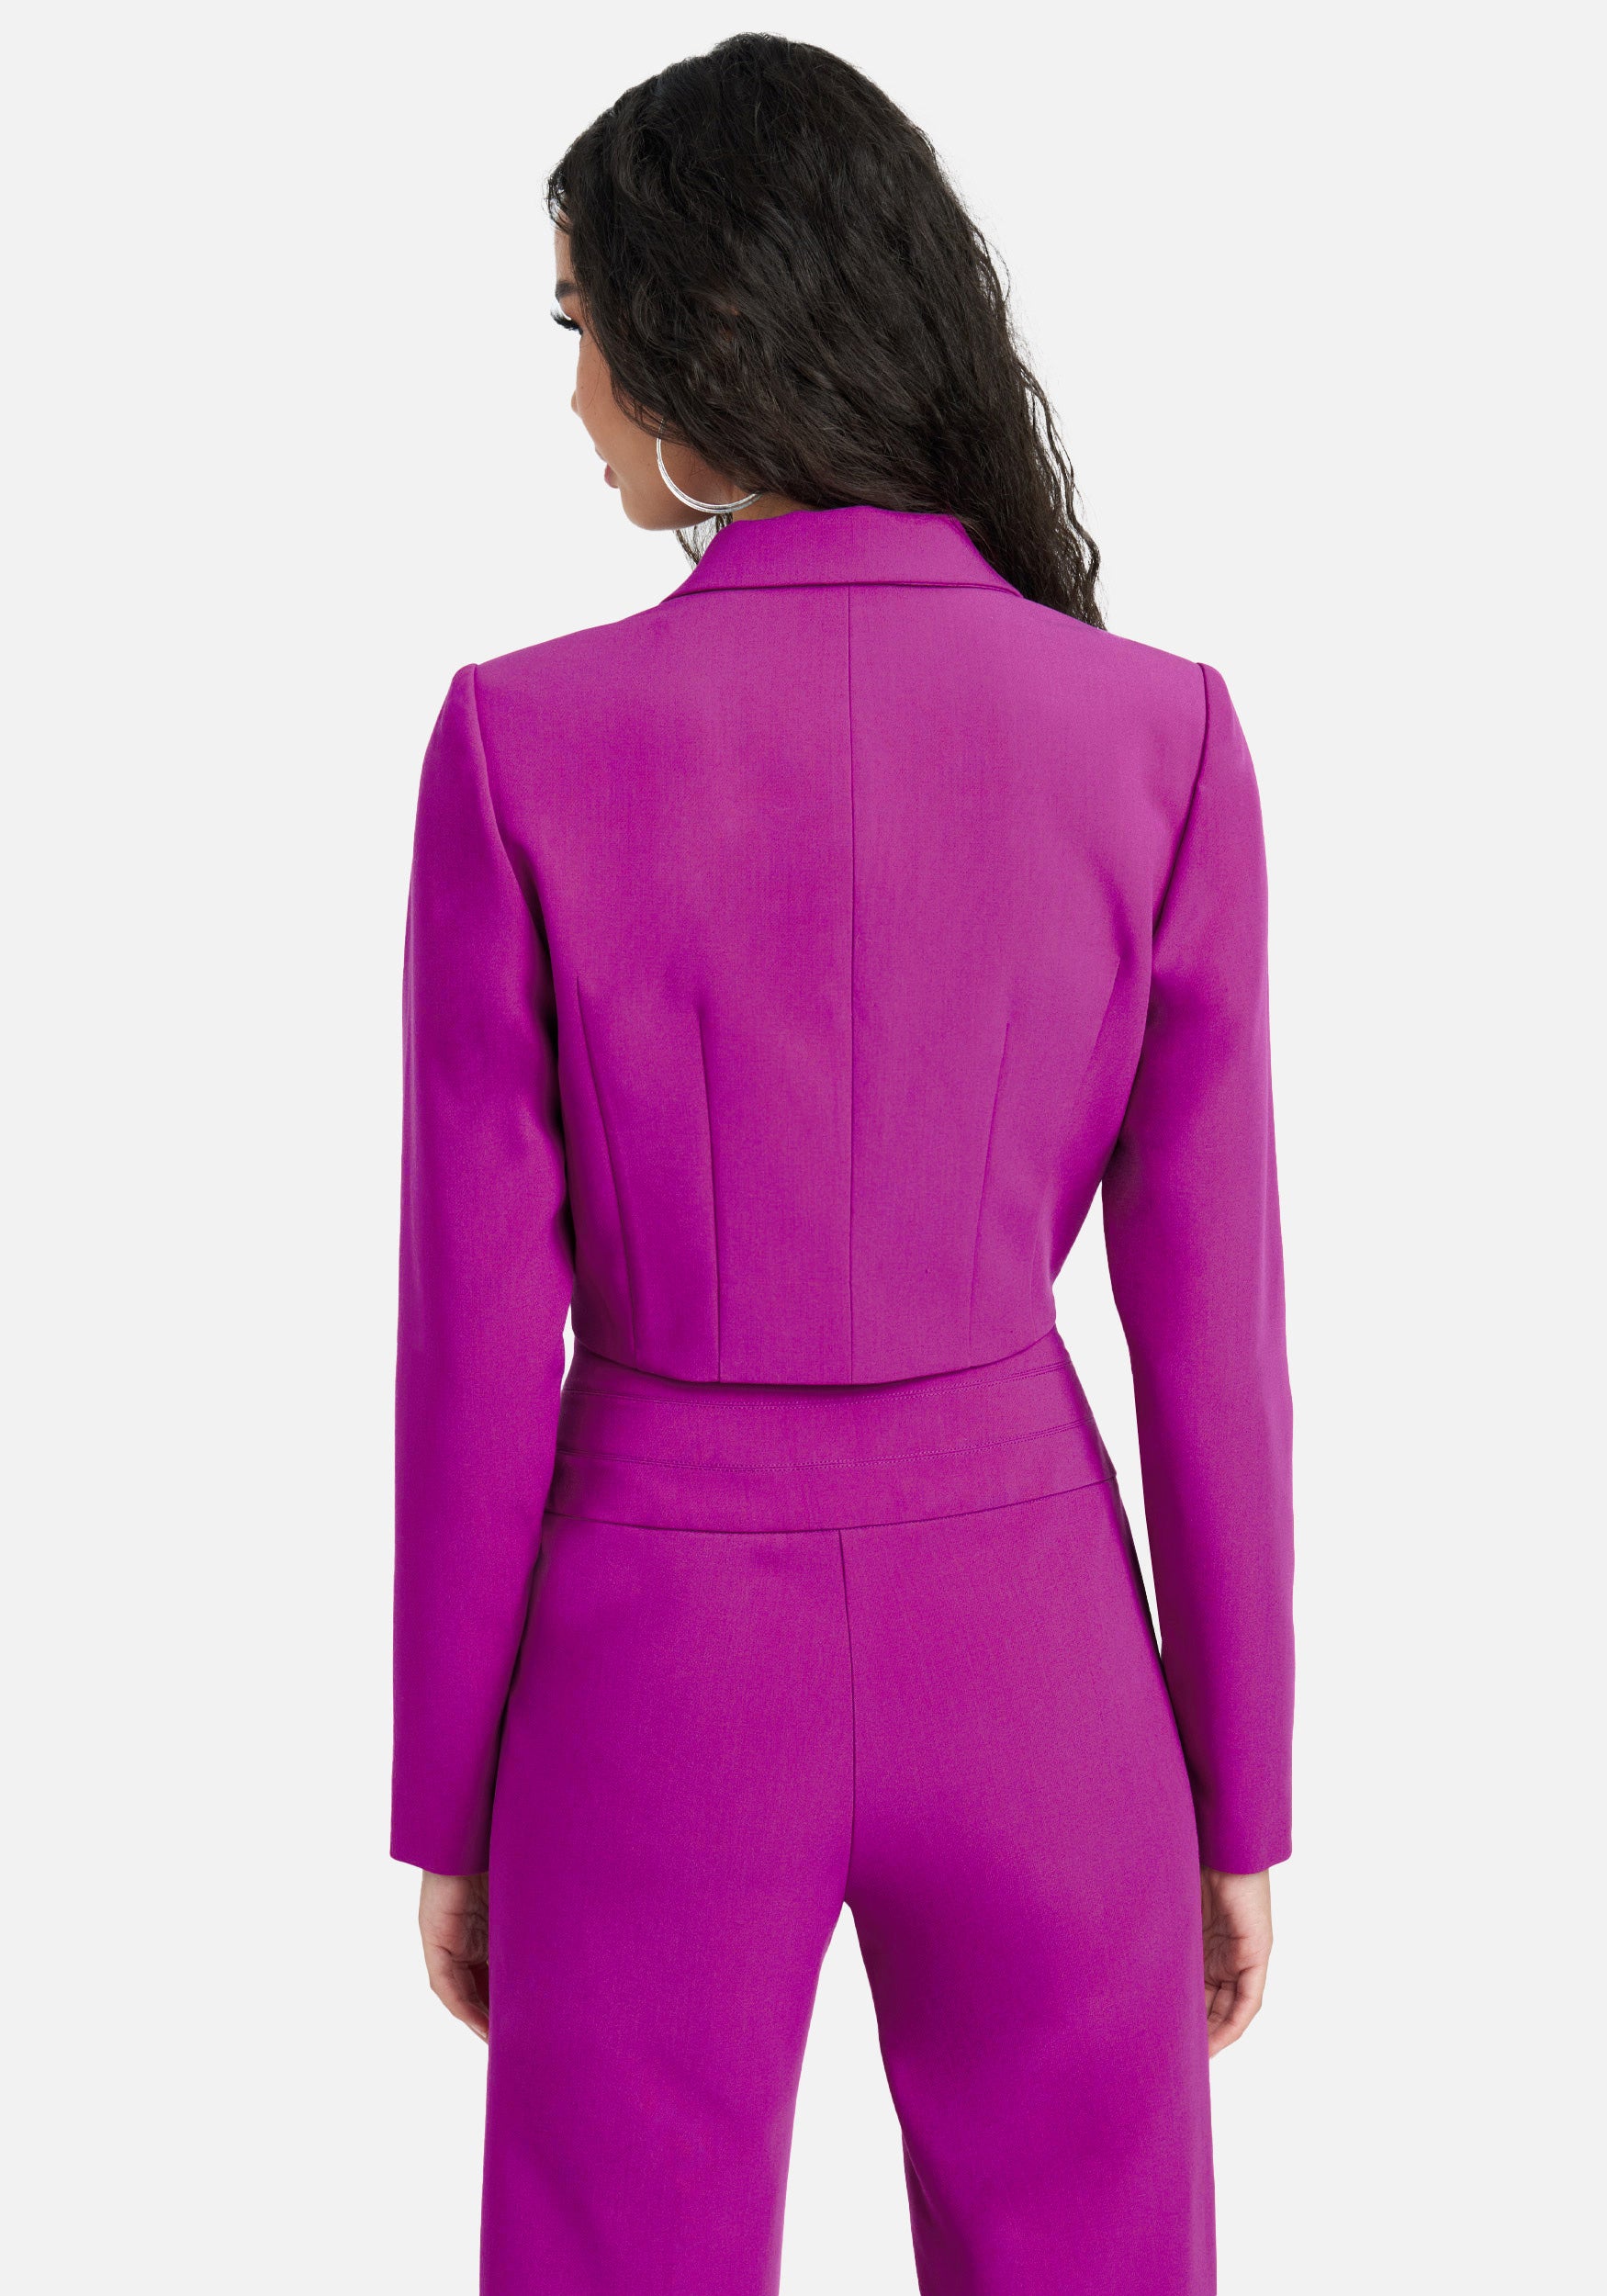 Satin One Button Tailored Jacket | bebe